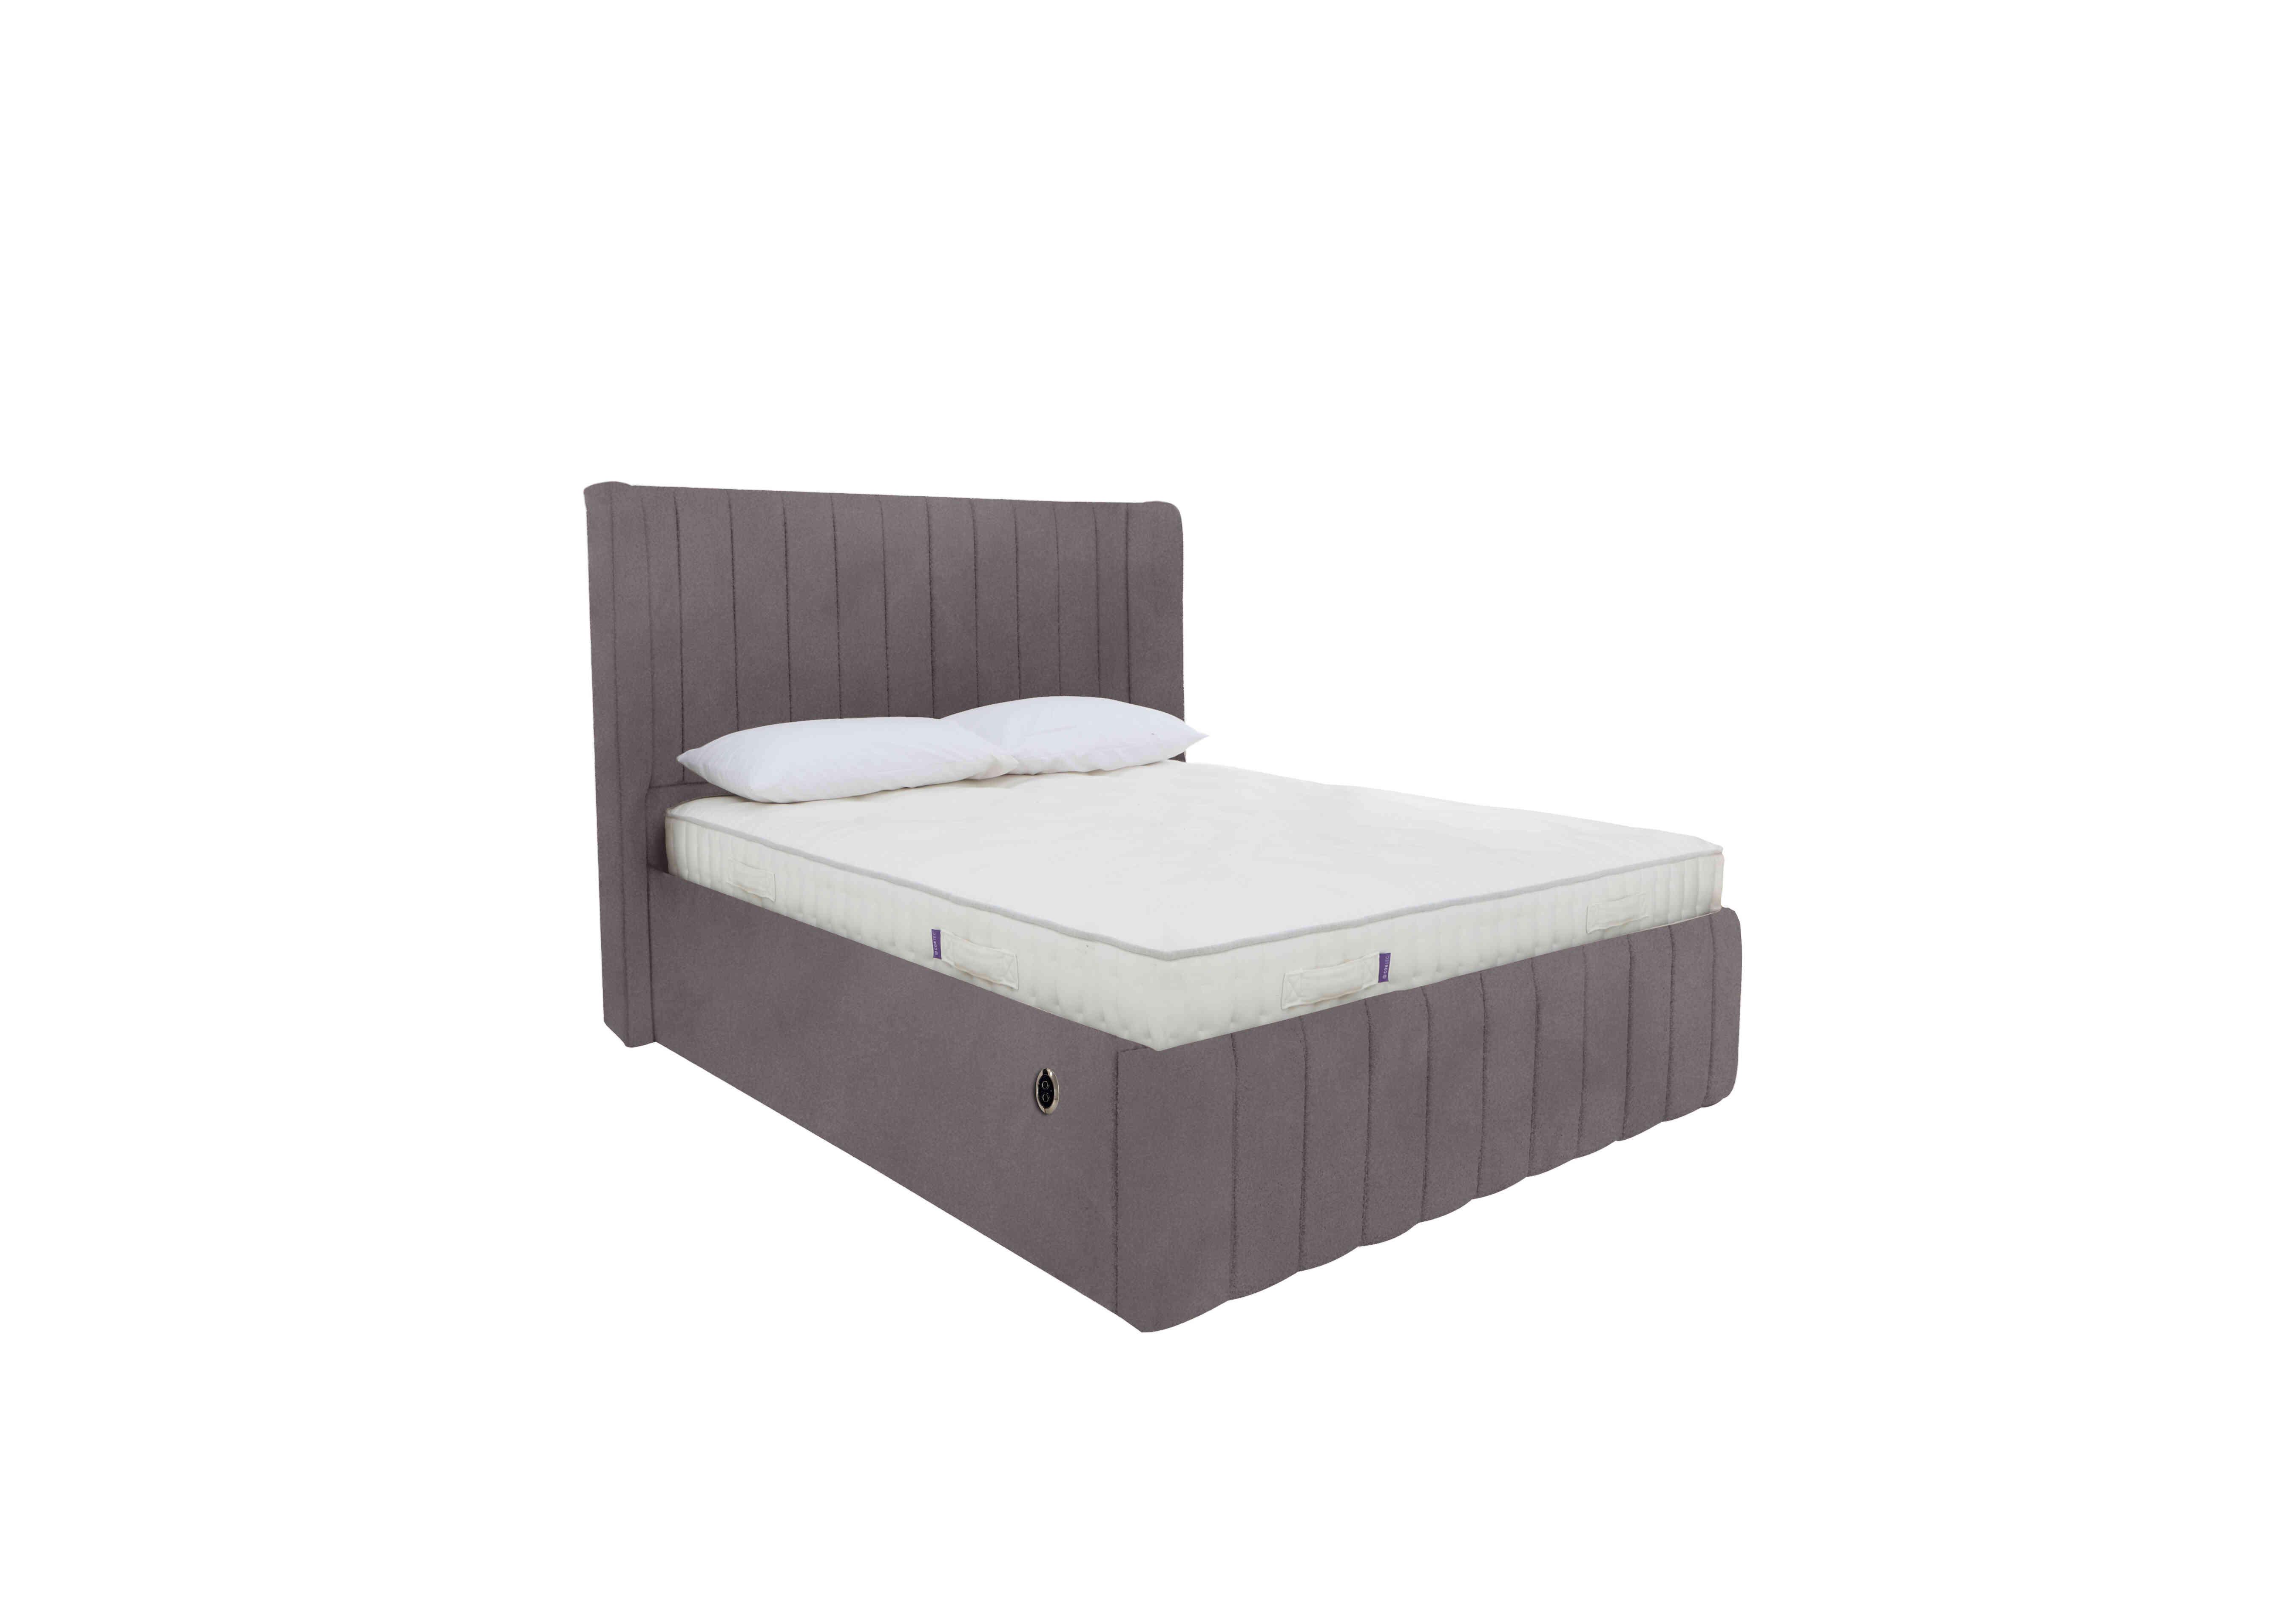 Eira Low Foot End Electric Ottoman Bed Frame in Sanderson Storm on Furniture Village